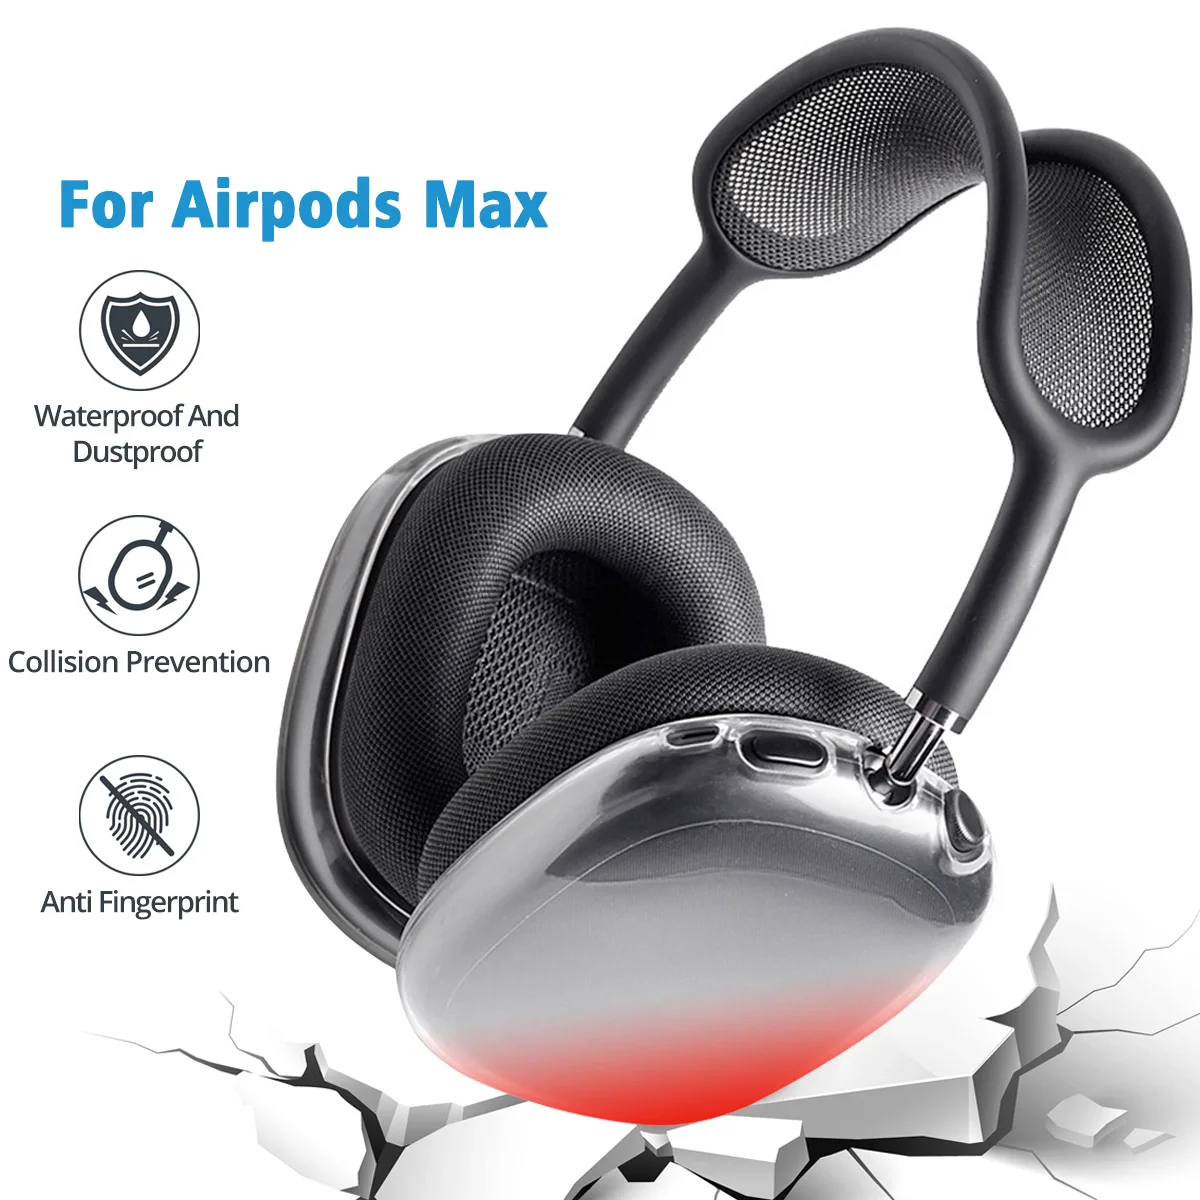  Case Cover for AirPods Max, Soft Silicone Case Cover